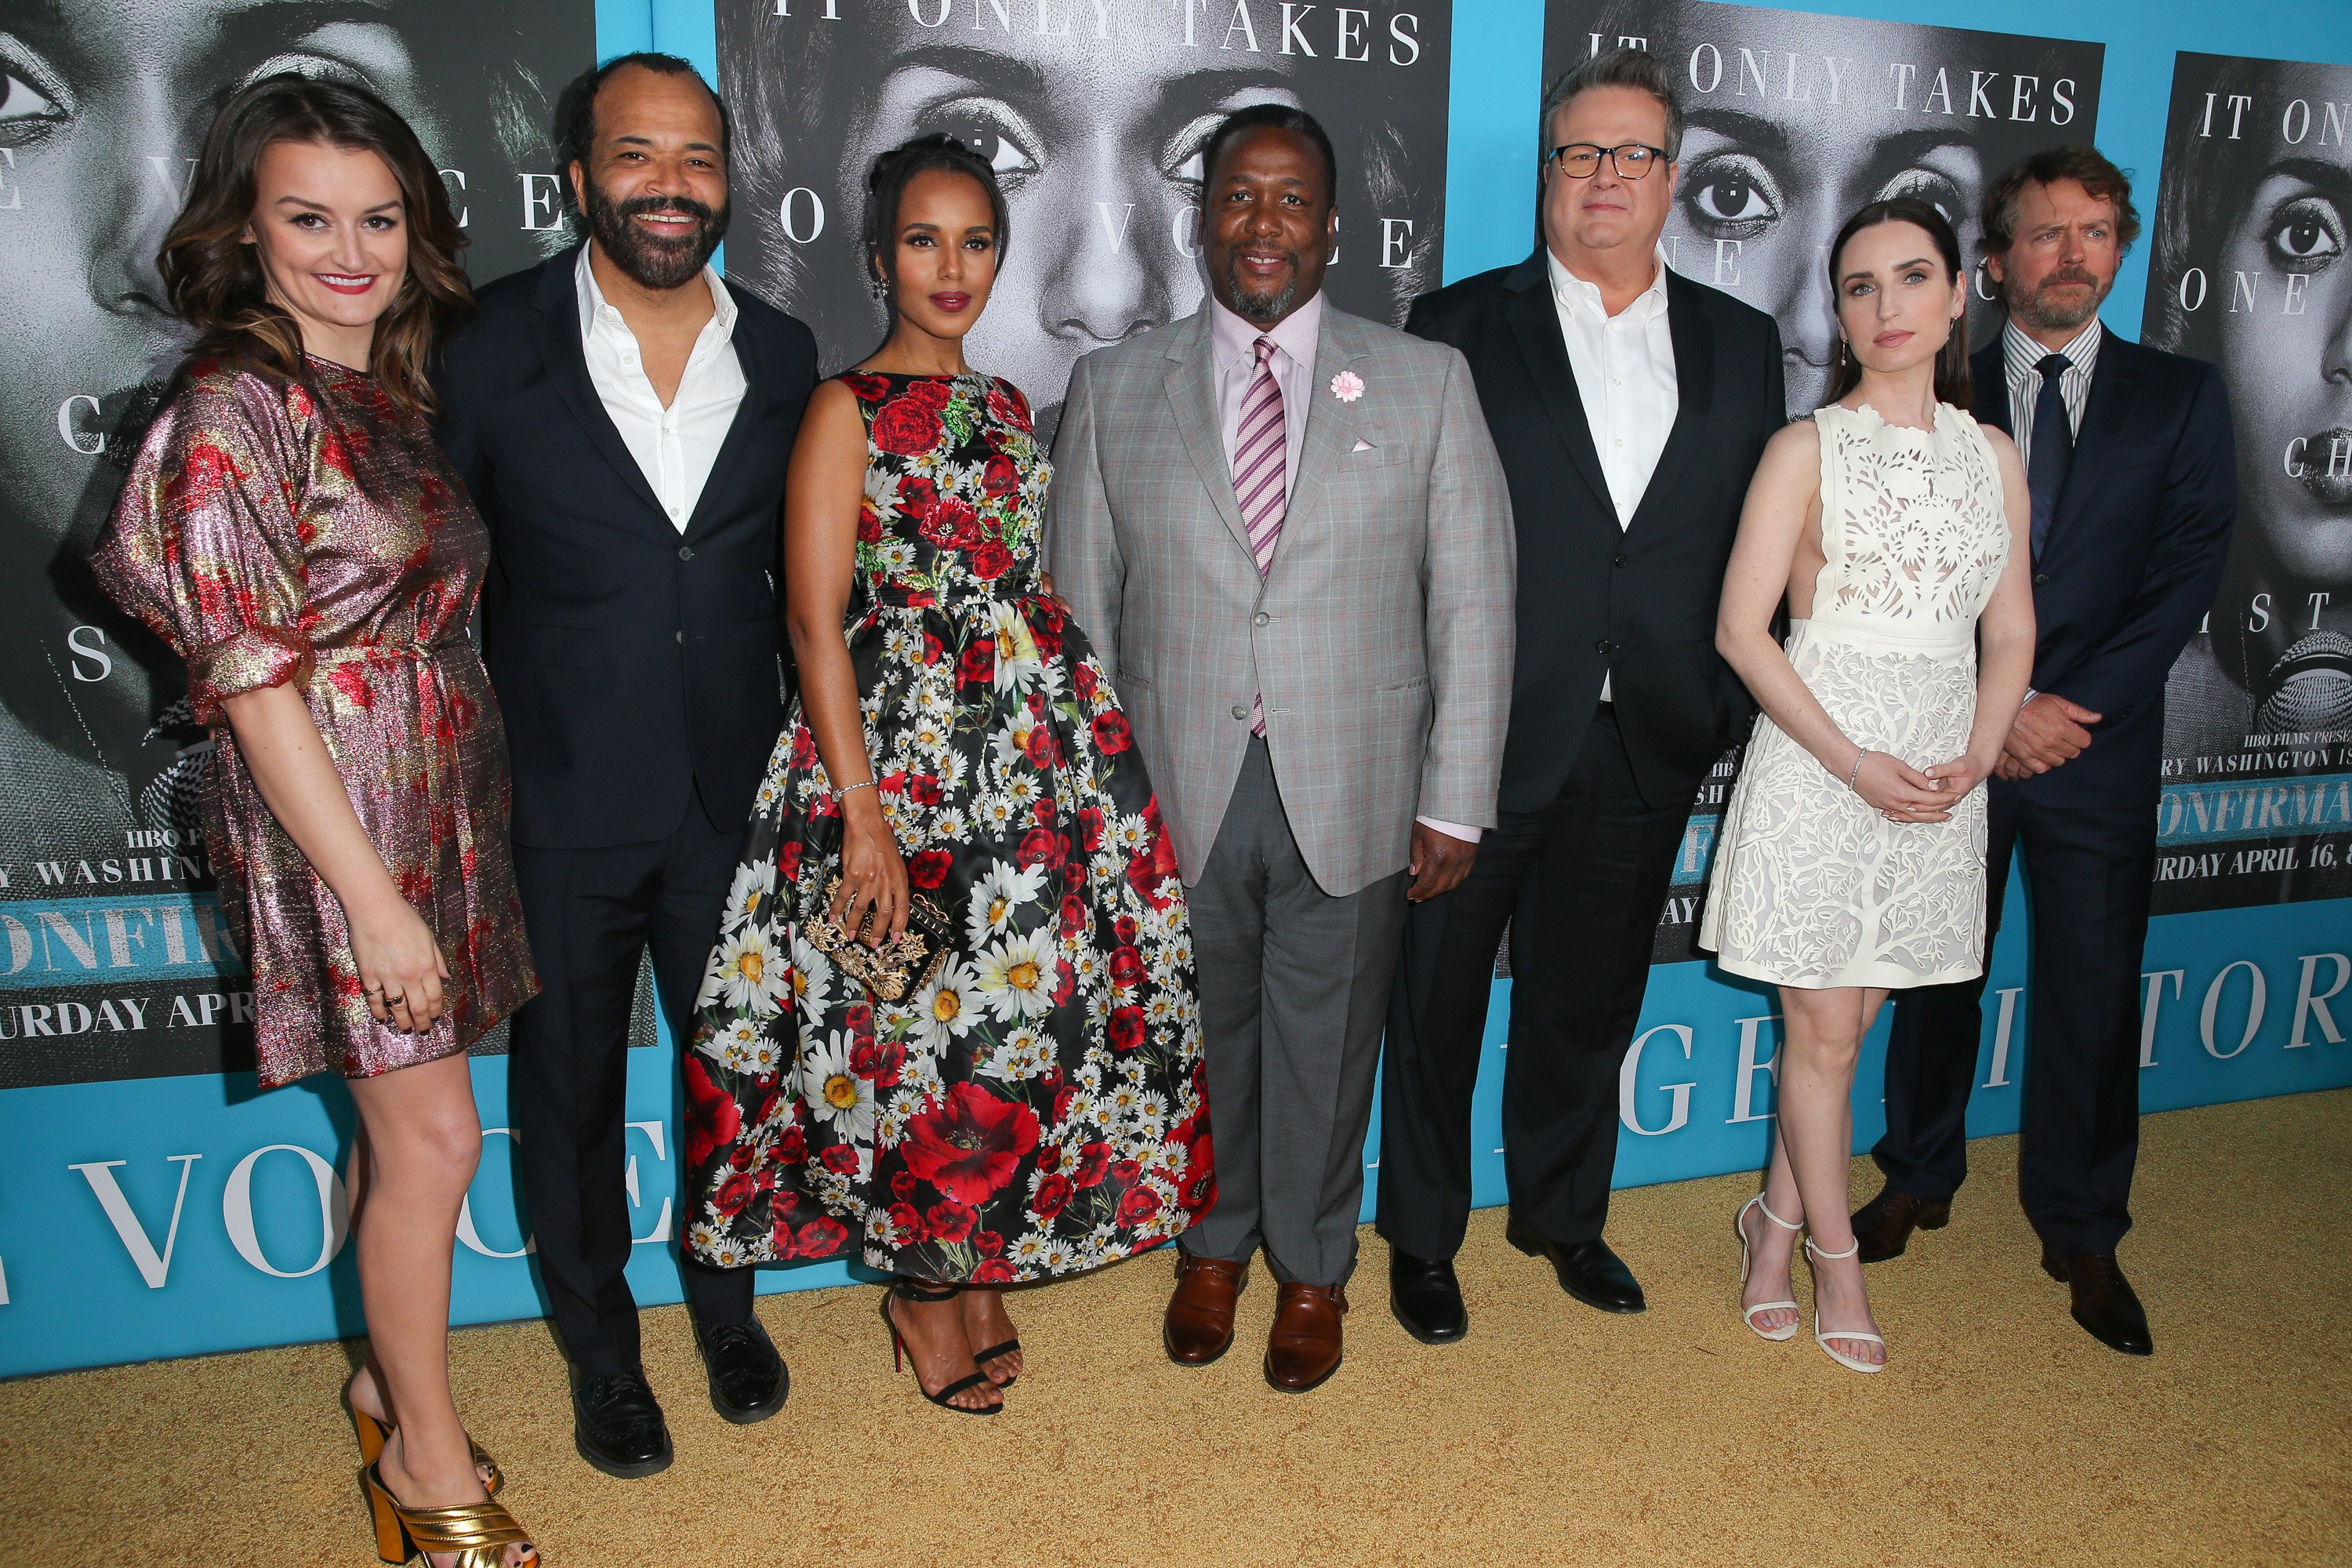 Alison Wright, Jeffery Wright, Kerry Washington, Wendell Pierce, Eric Stonestreet, Zoe Lister-Jones, and Greg Kinnear attend the Los Angeles premiere of HBO Films' 'Confirmation' on March 31, 2016 in Hollywood, California. | Source: Getty Images